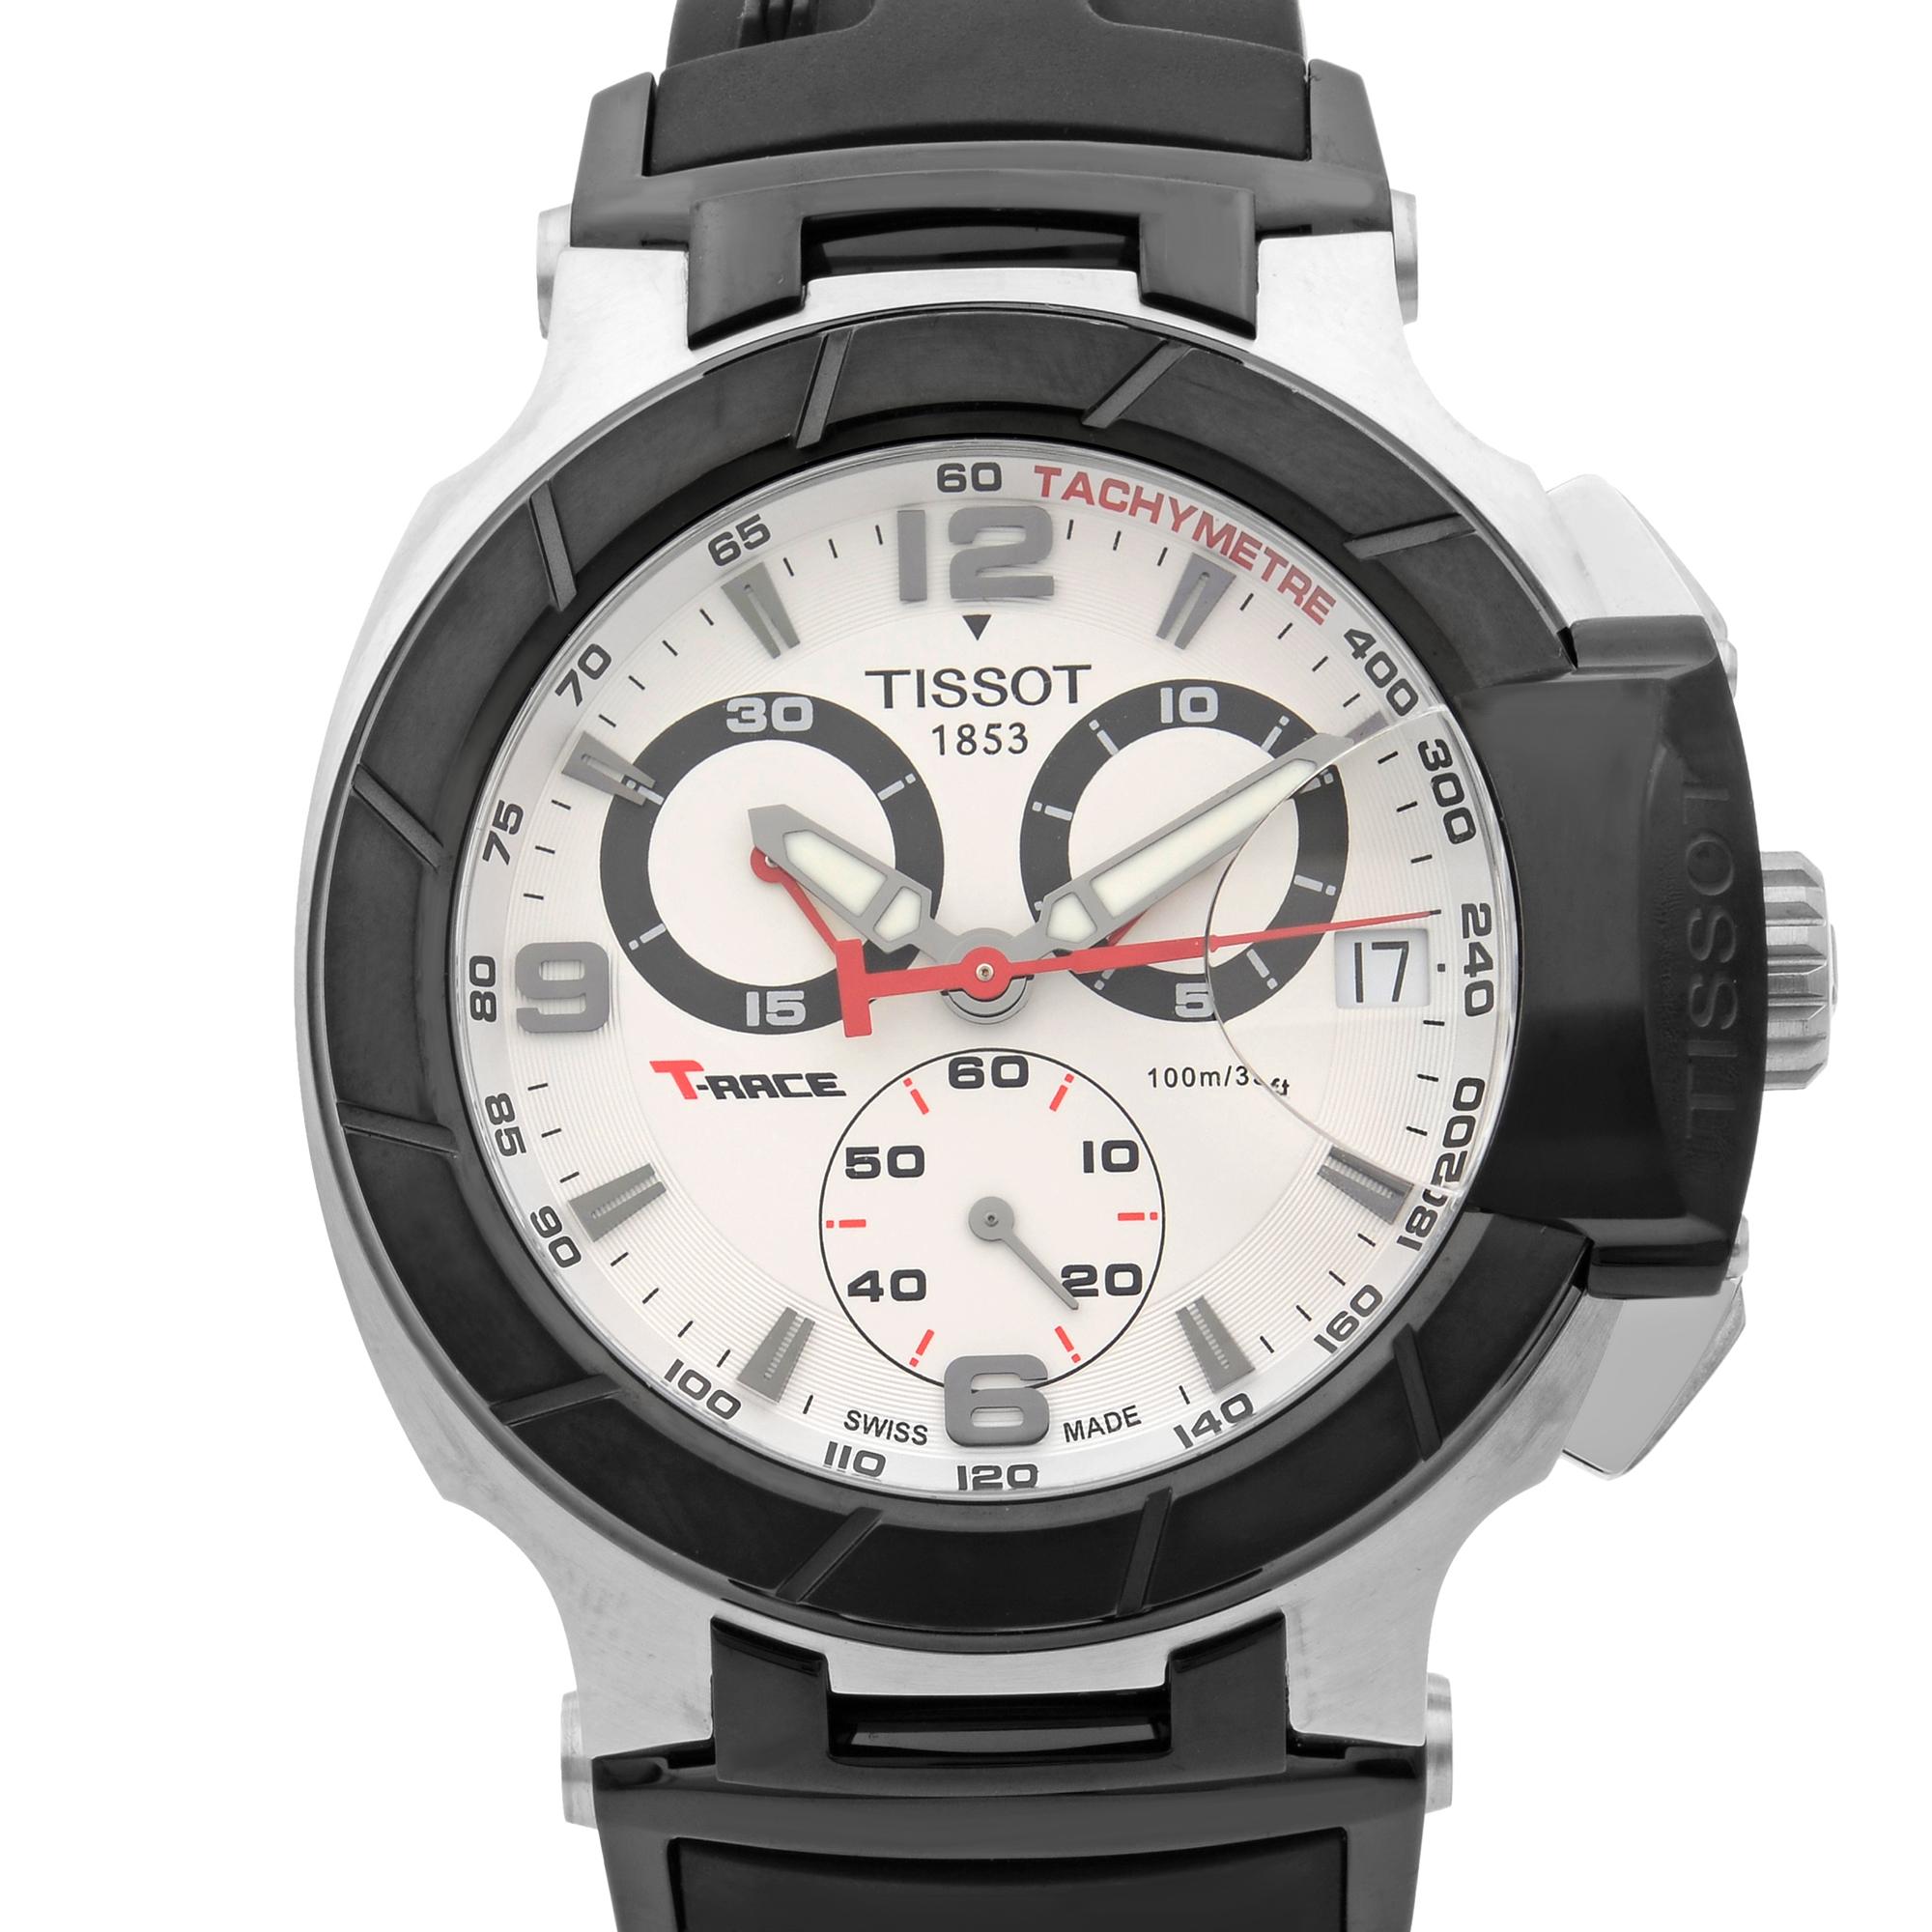 This pre-owned mint condition Tissot T-Race  T048.417.27.037.00 is a beautiful men's timepiece that is powered by quartz (battery) movement which is cased in a stainless steel case. It has a round shape face, chronograph, chronograph hand, date